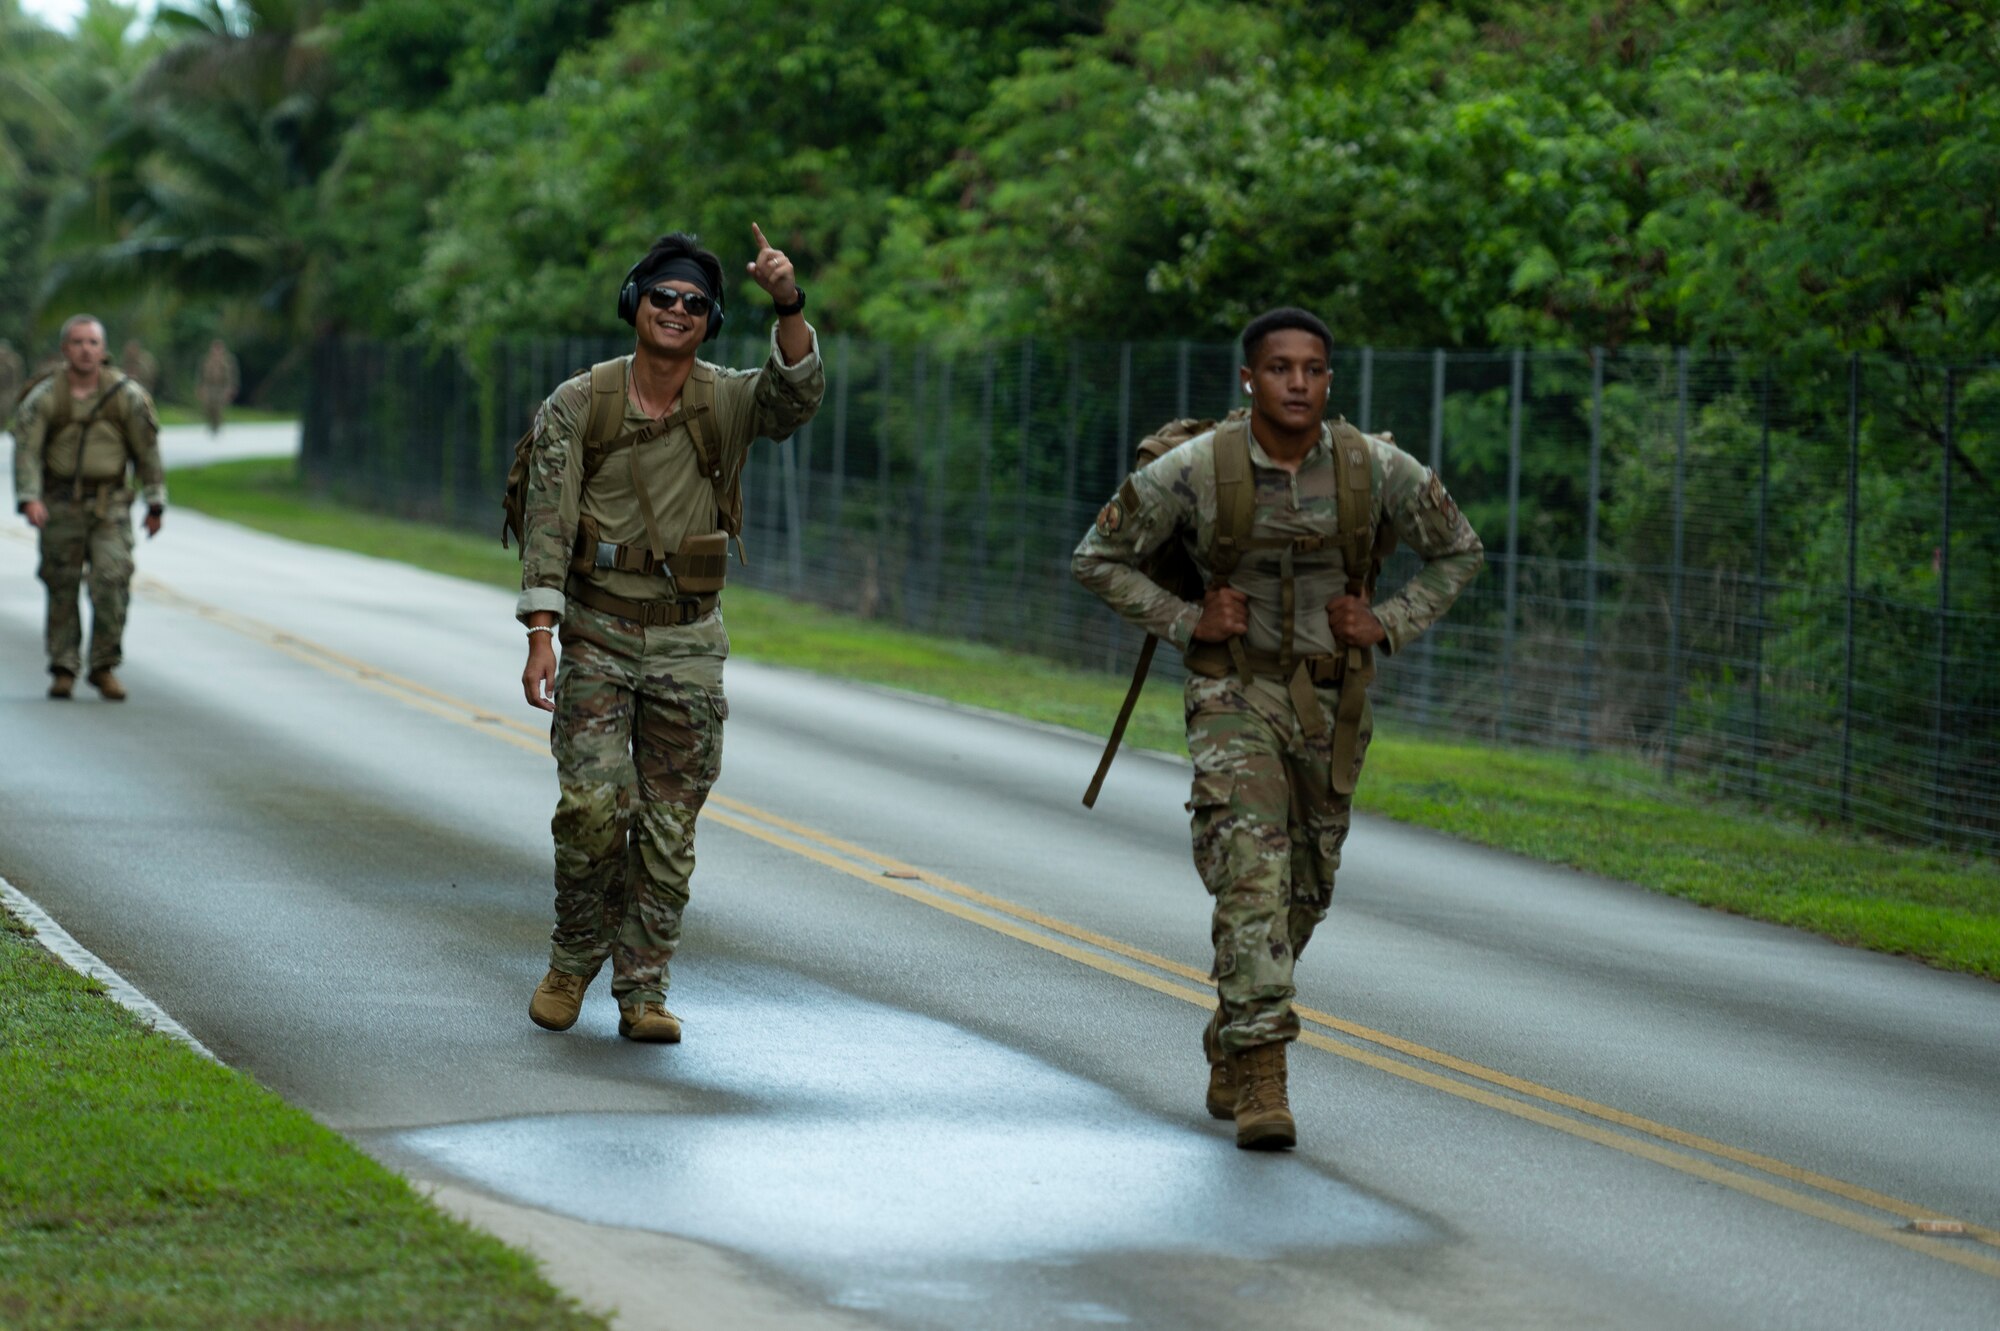 U.S. Air Force service members walk from Tarague beach to Sanders Slope during the Office of Special Investigations’ Hustler-6 memorial event on Andersen Air Force Base, Guam, Dec. 21, 2022. Since 2016, OSI agents assigned to Andersen AFB have annually honored the Hustler-6, who lost their lives during a mission near Bagram, Afghanistan on Dec. 21, 2015, by rucking up and down Sanders Slope. (U.S. Air Force photo by Airman Spencer Perkins)